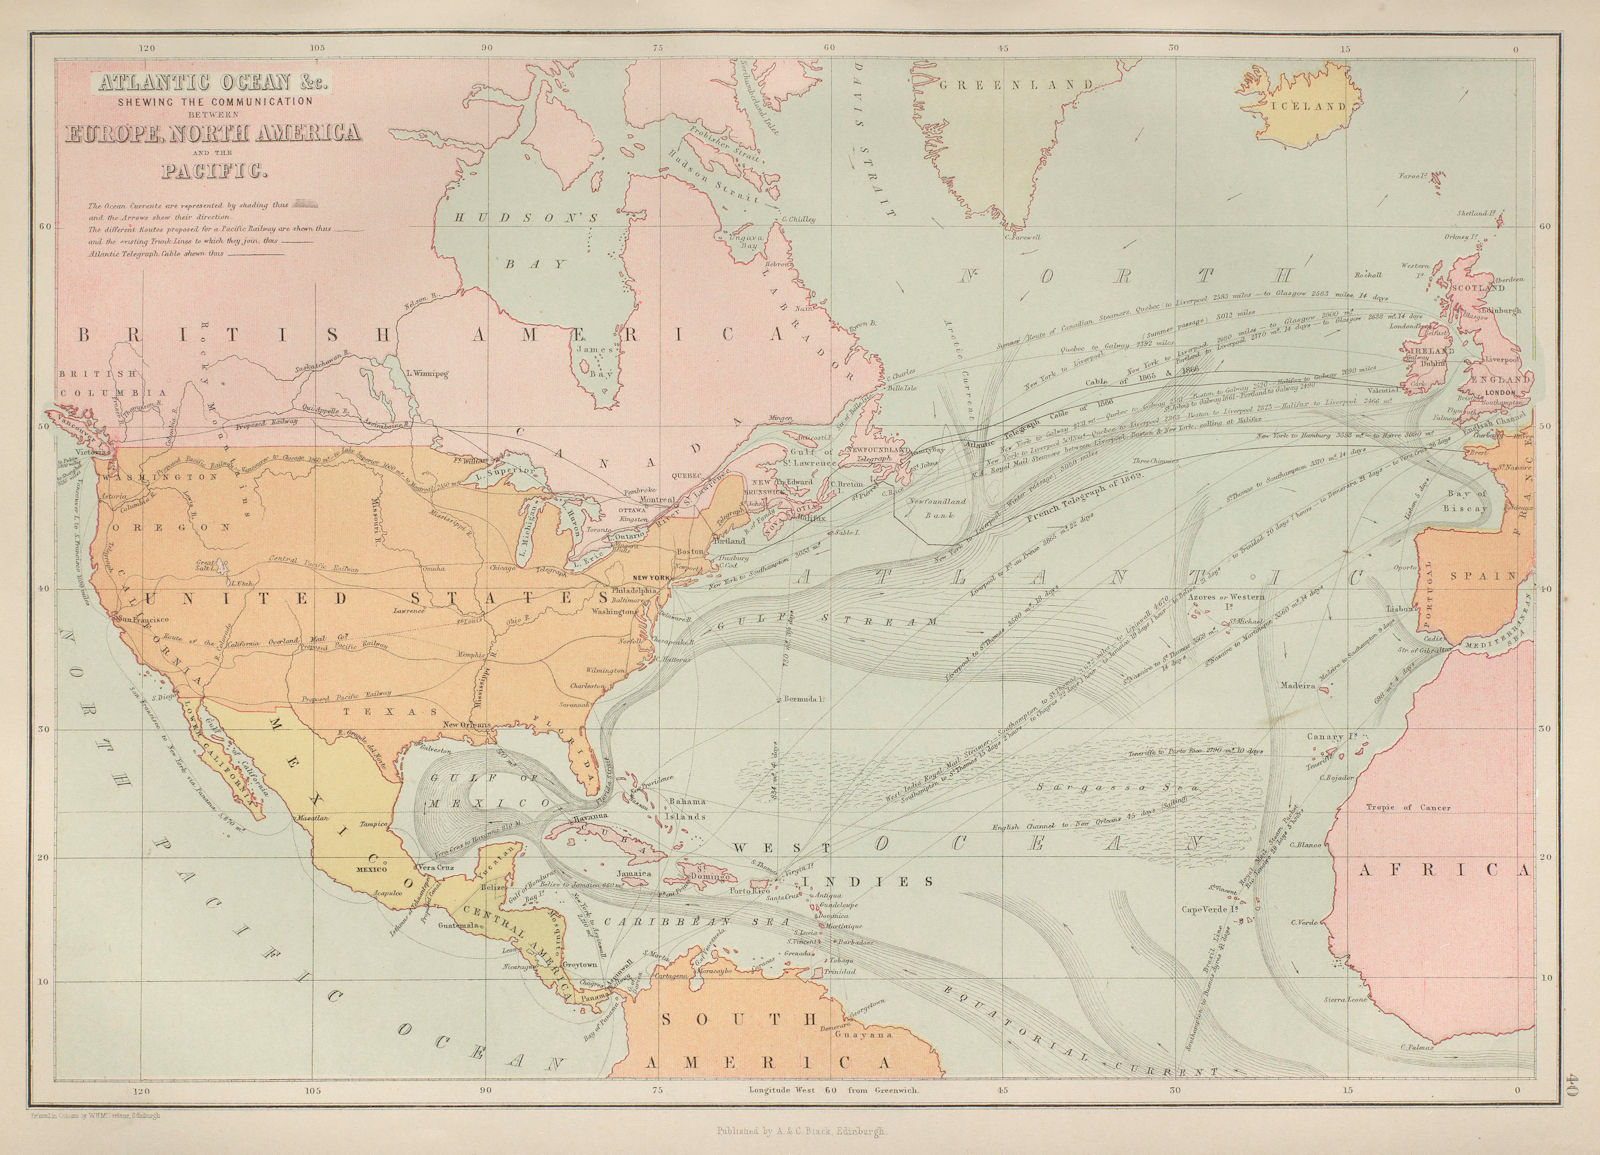 North Atlantic Ocean. Telegraph cables, Steamer routes. BARTHOLOMEW 1870 map